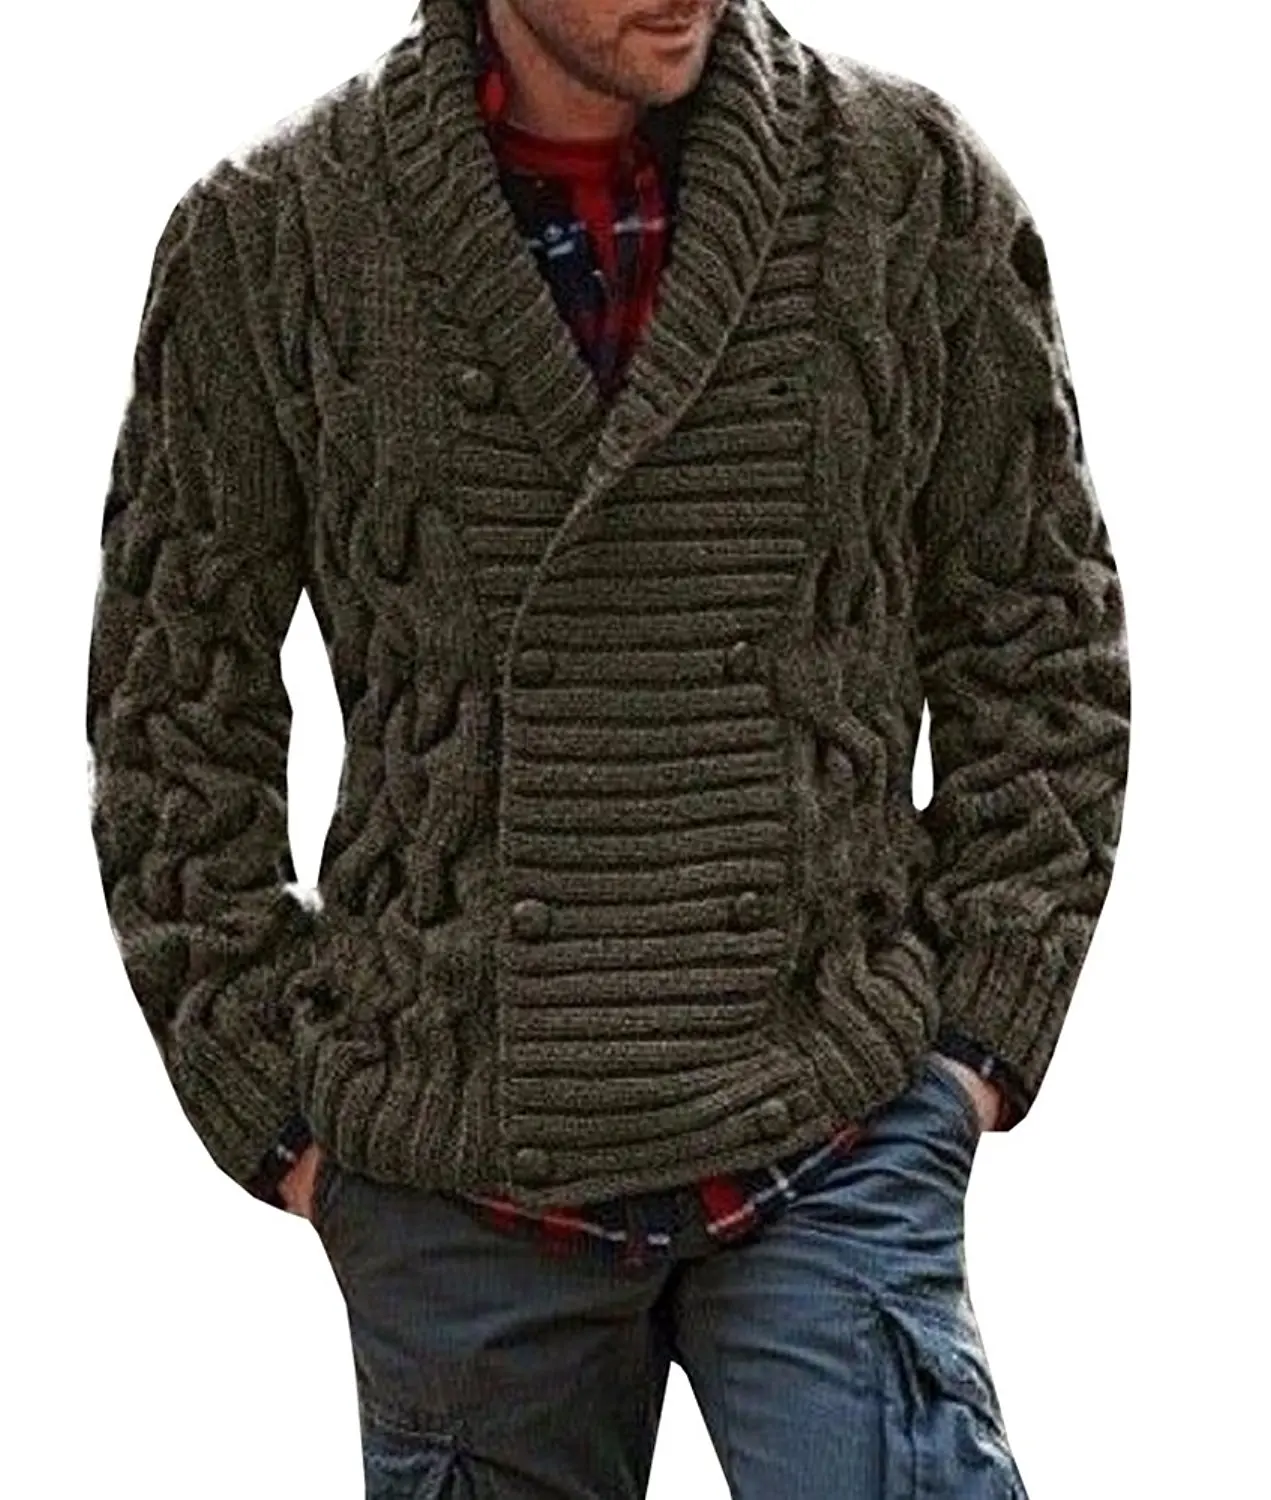 Cheap Mens Double Breasted Cardigan Sweater, find Mens Double Breasted ...